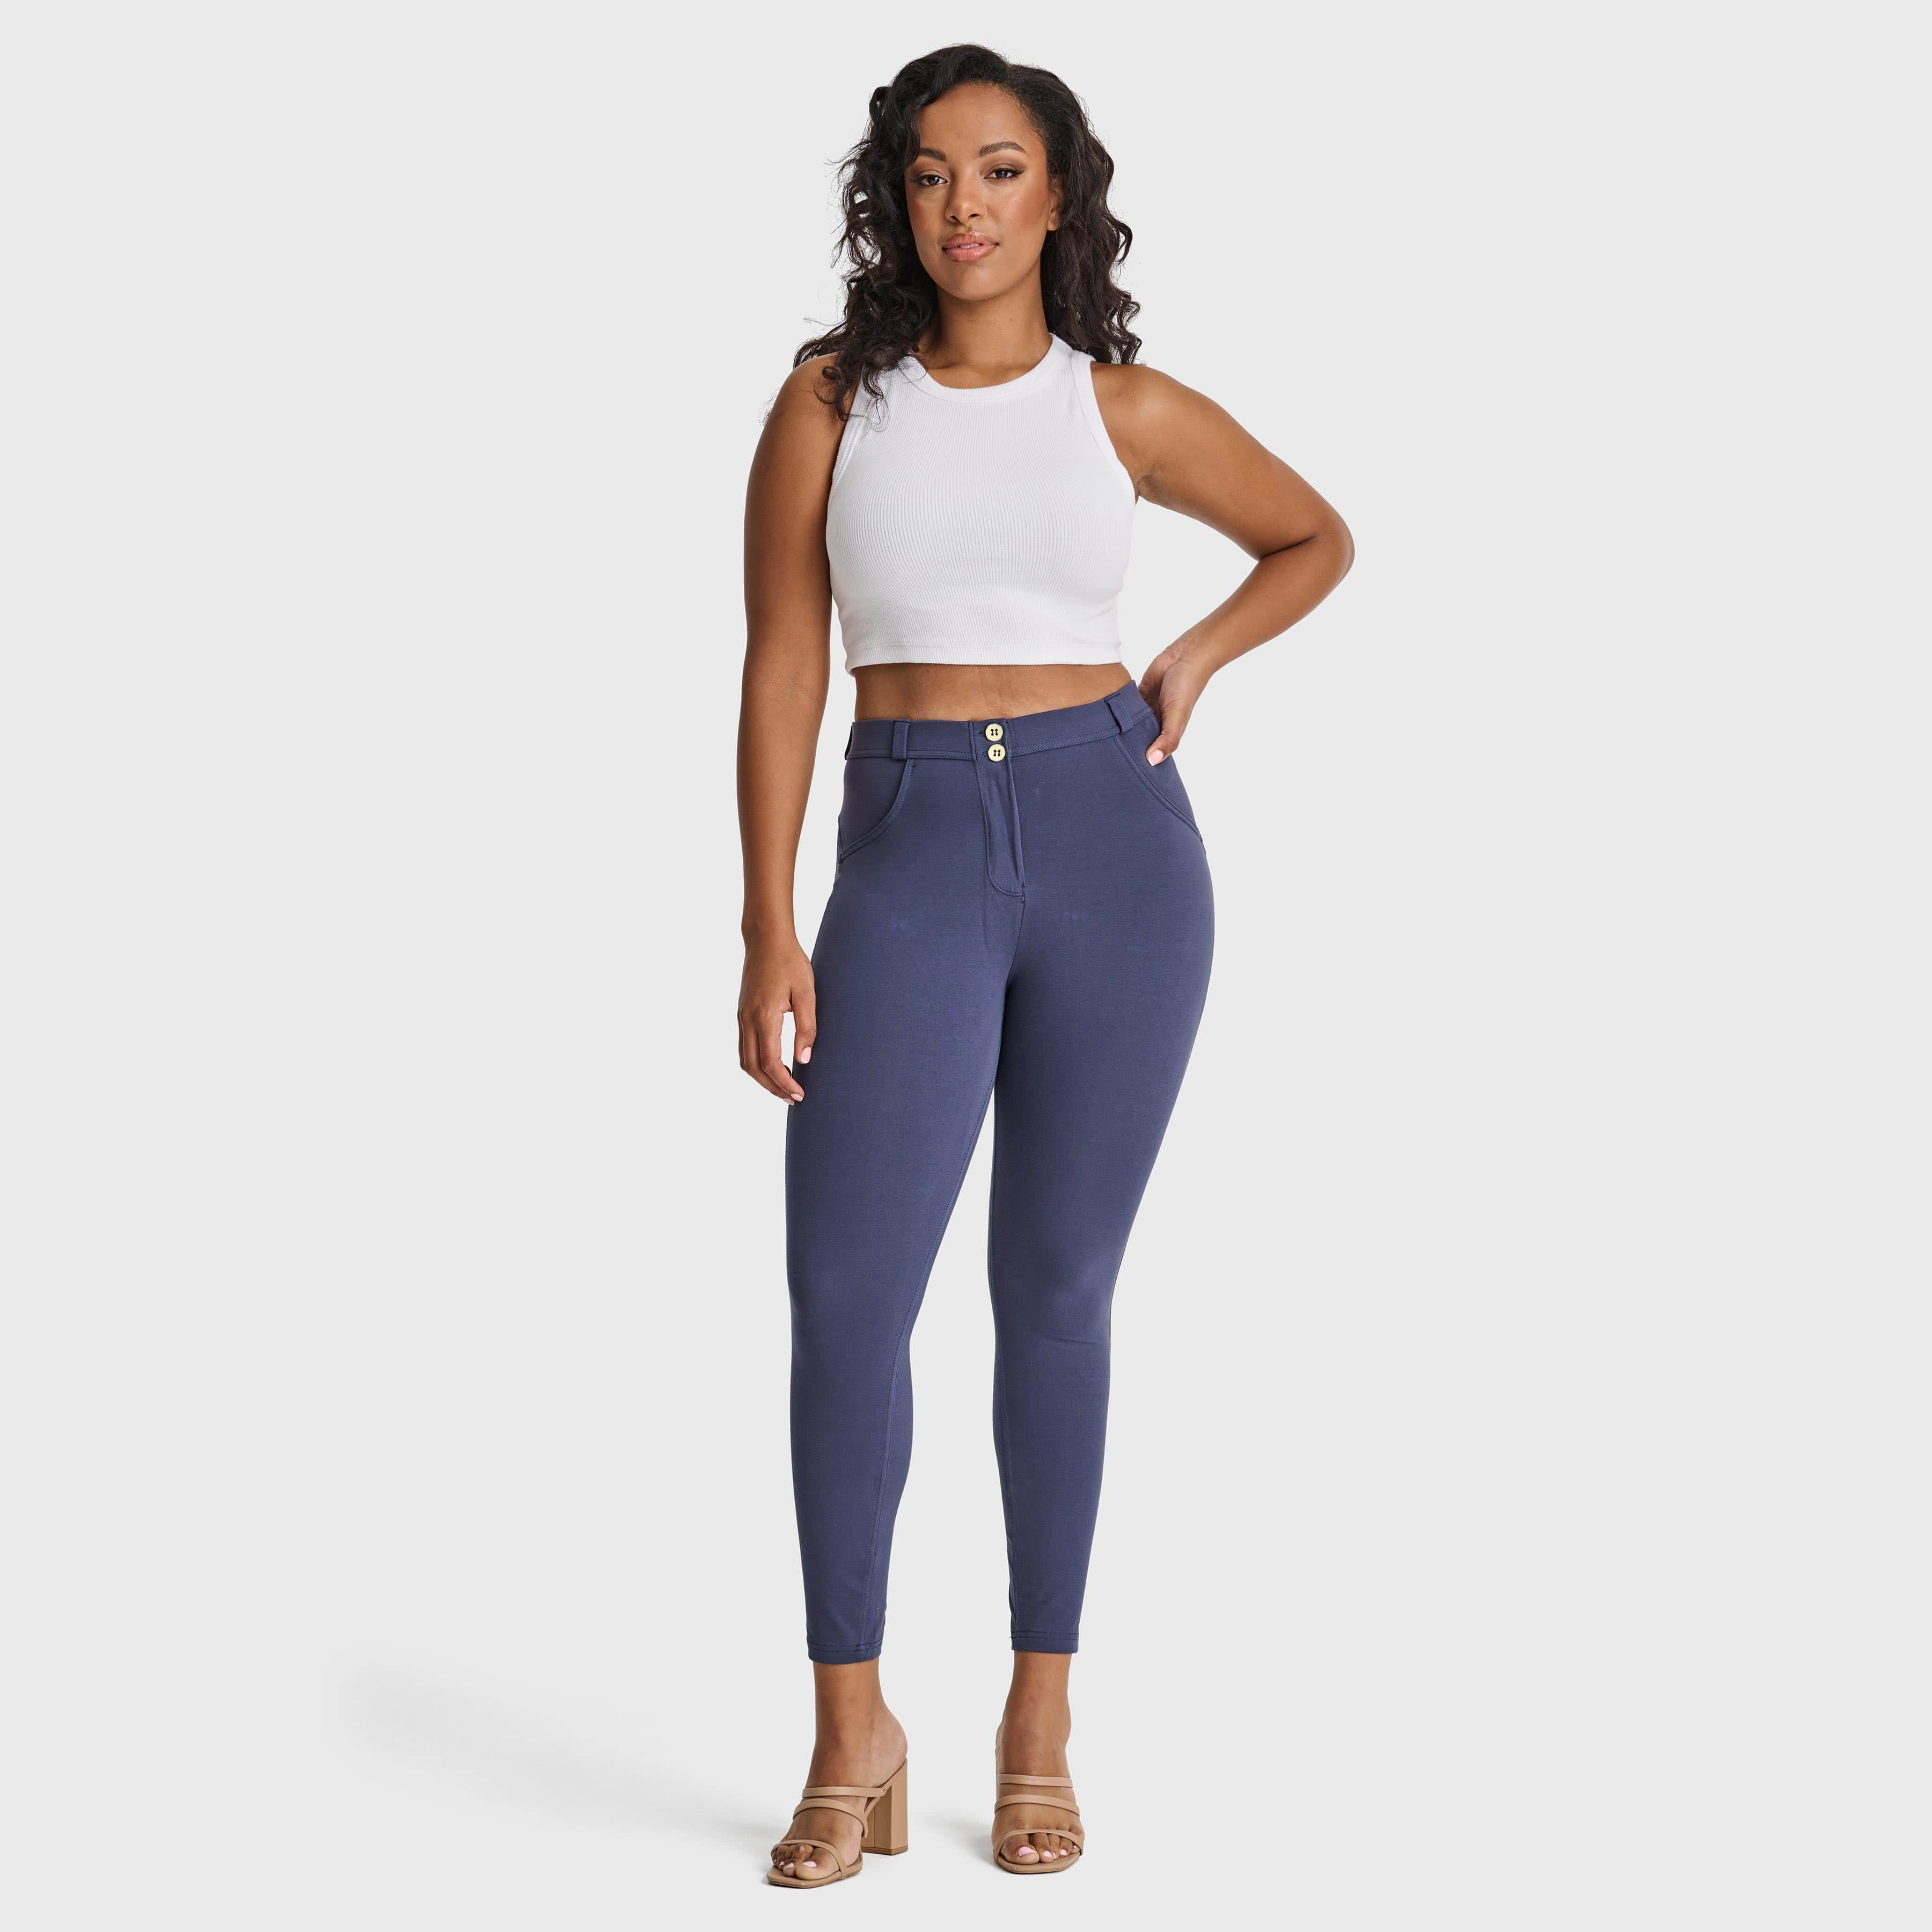 WR.UP Freddy Jeans Review | FitNish.com